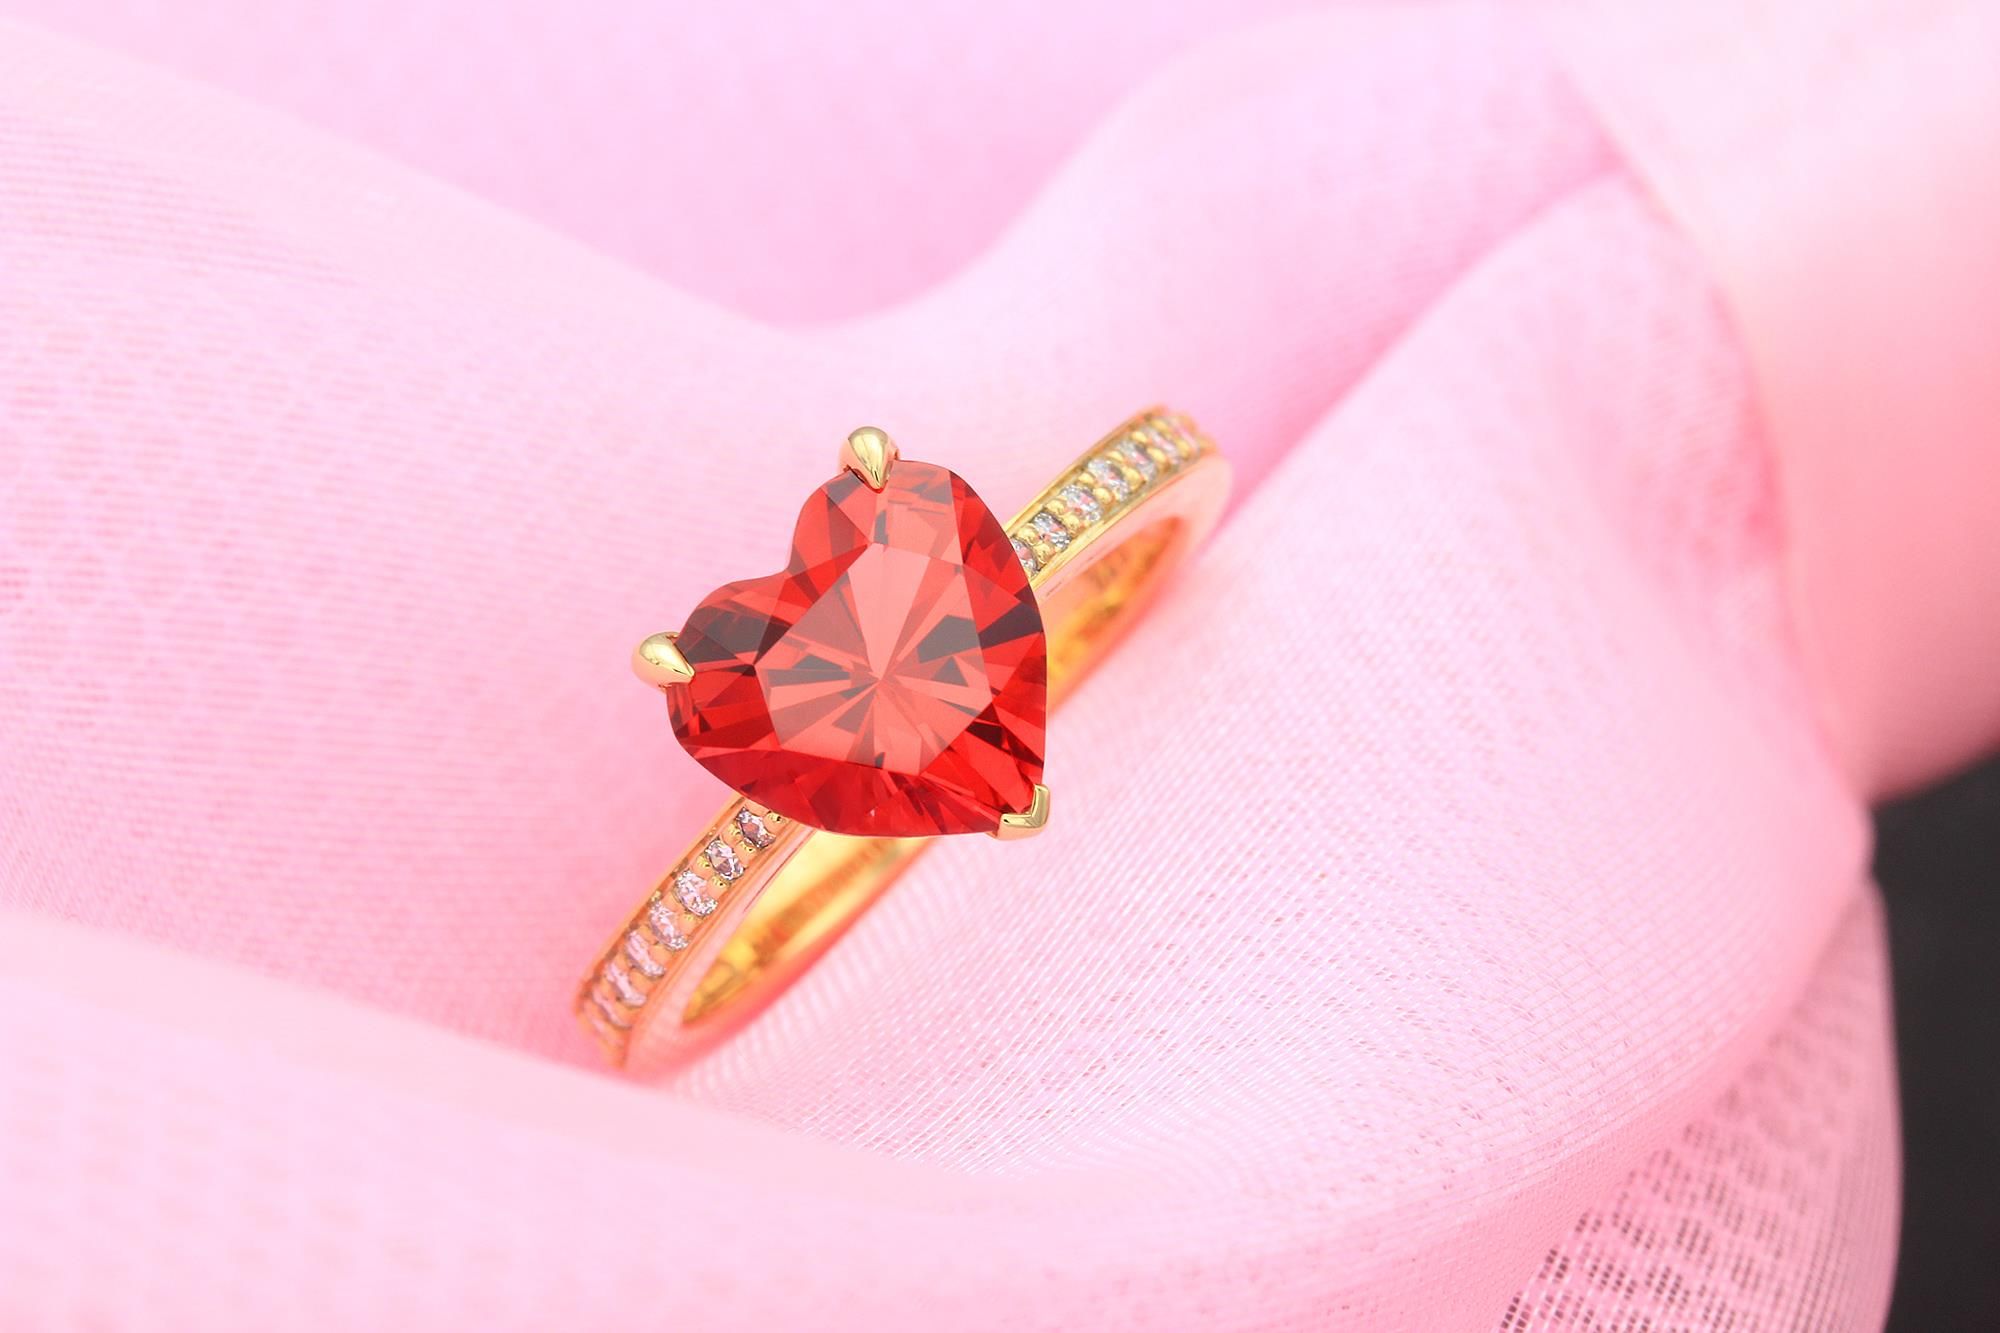 Roses are red, Siamite is red too. Heart on the ring, brings love to you.